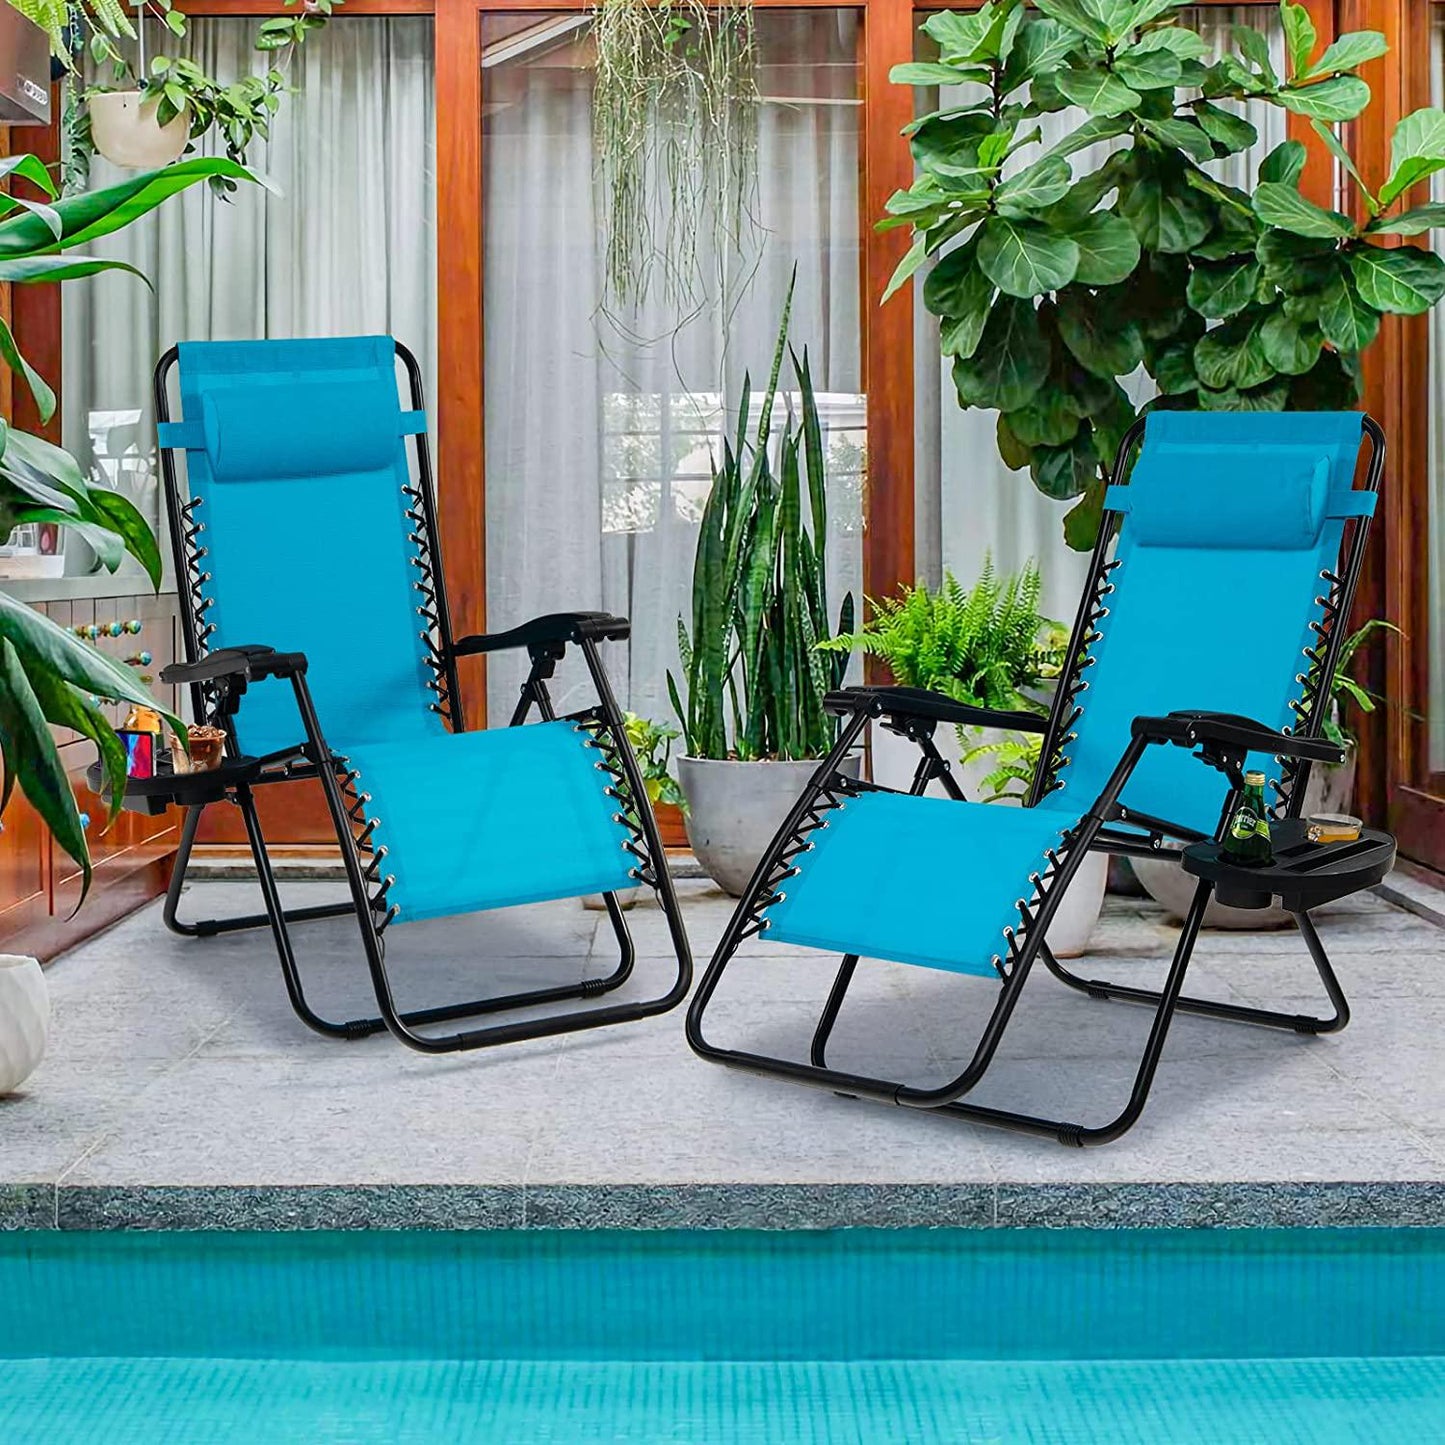 Zero Gravity Chair, Adjustable Folding Reclining Lounge Chair with Pillow and Cup Holder, Patio Lawn Recliner for Outdoor Pool Camp Yard (Set of 2, Light Blue)